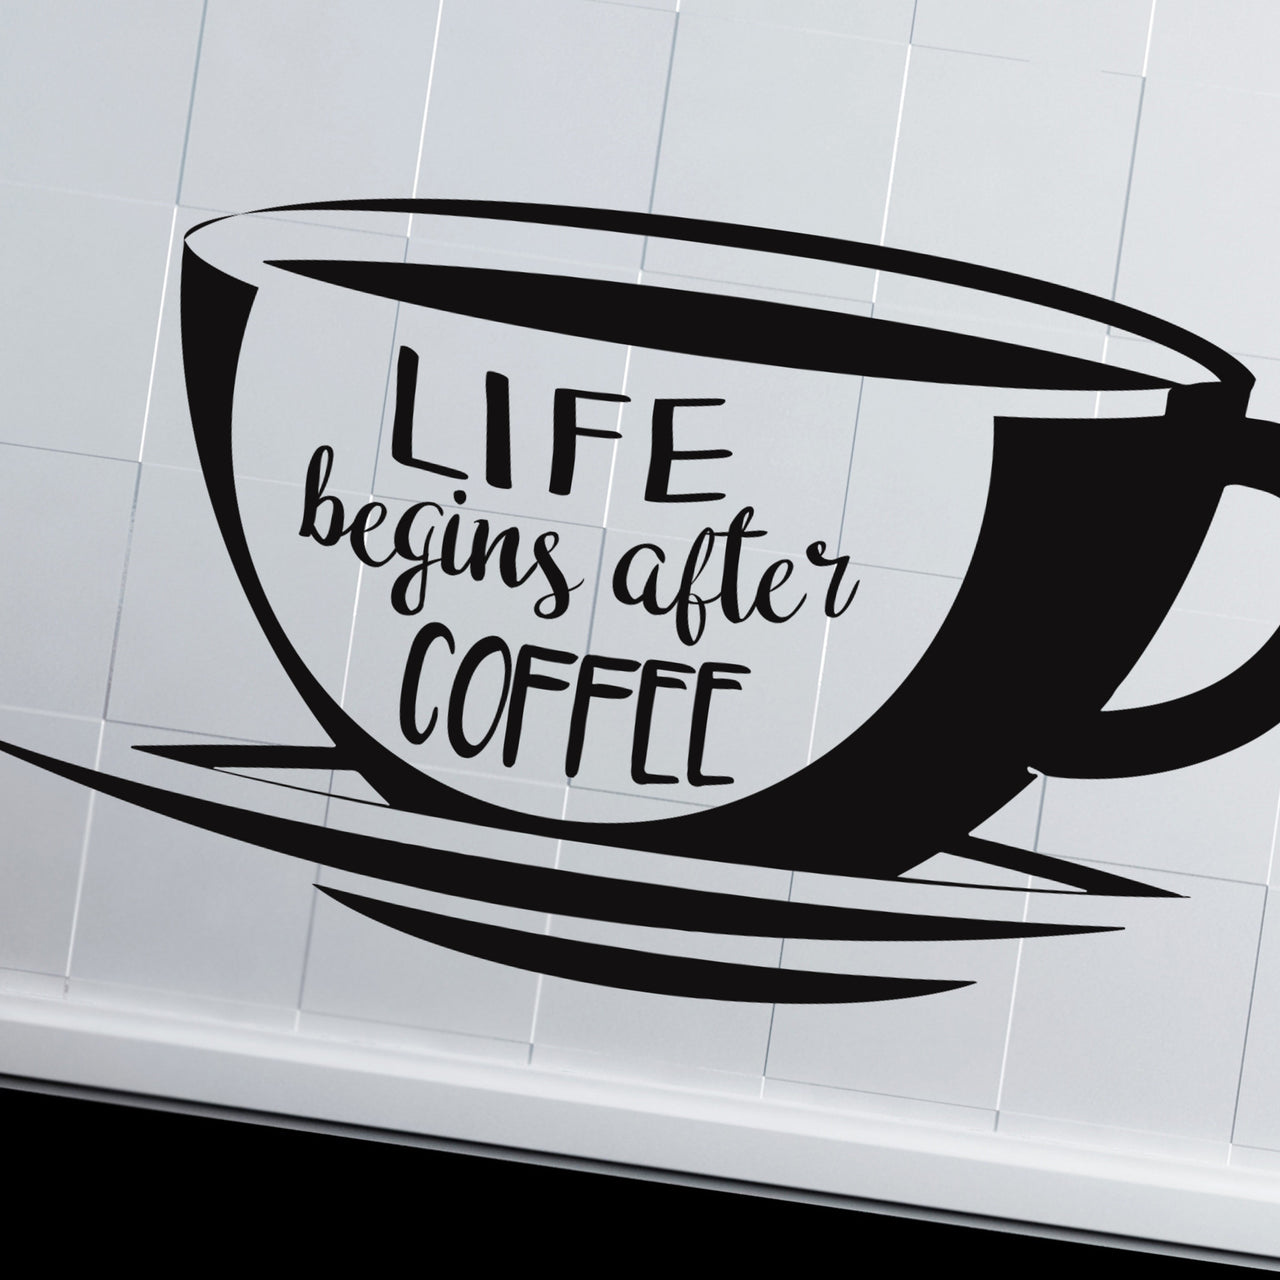 Life Begins After Coffee Wall Decal